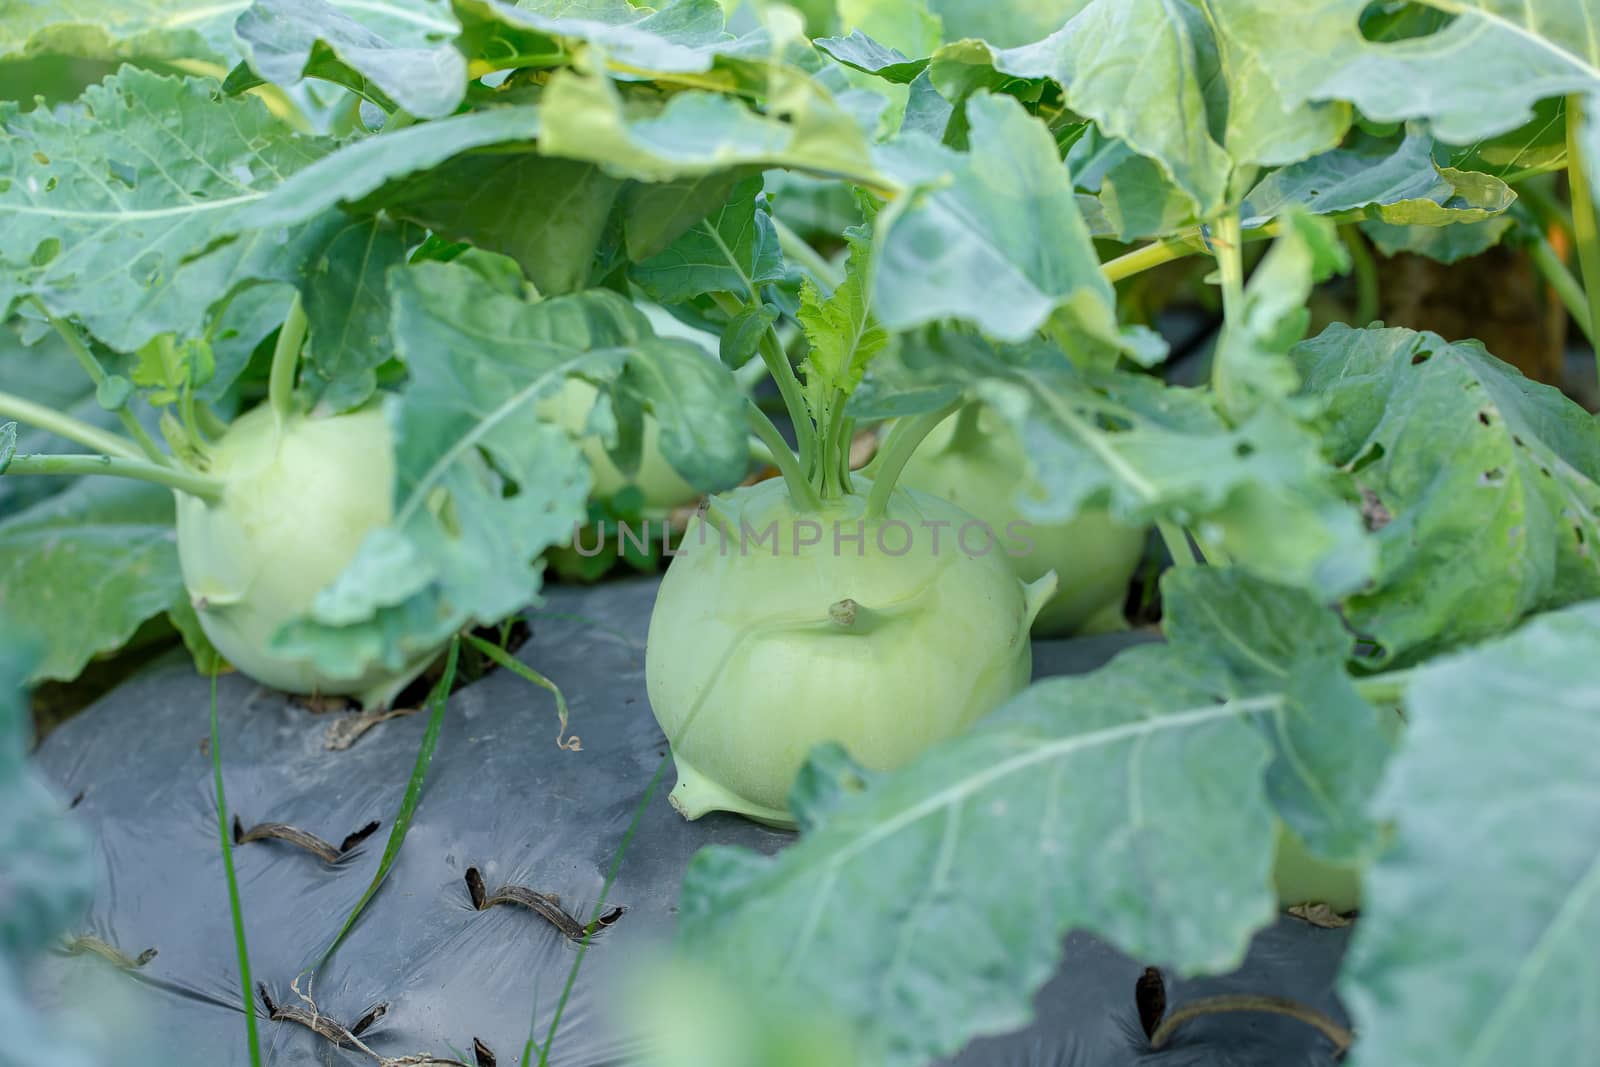 Kohlrabi cabbage or turnip plant growing in the agricultural farm.